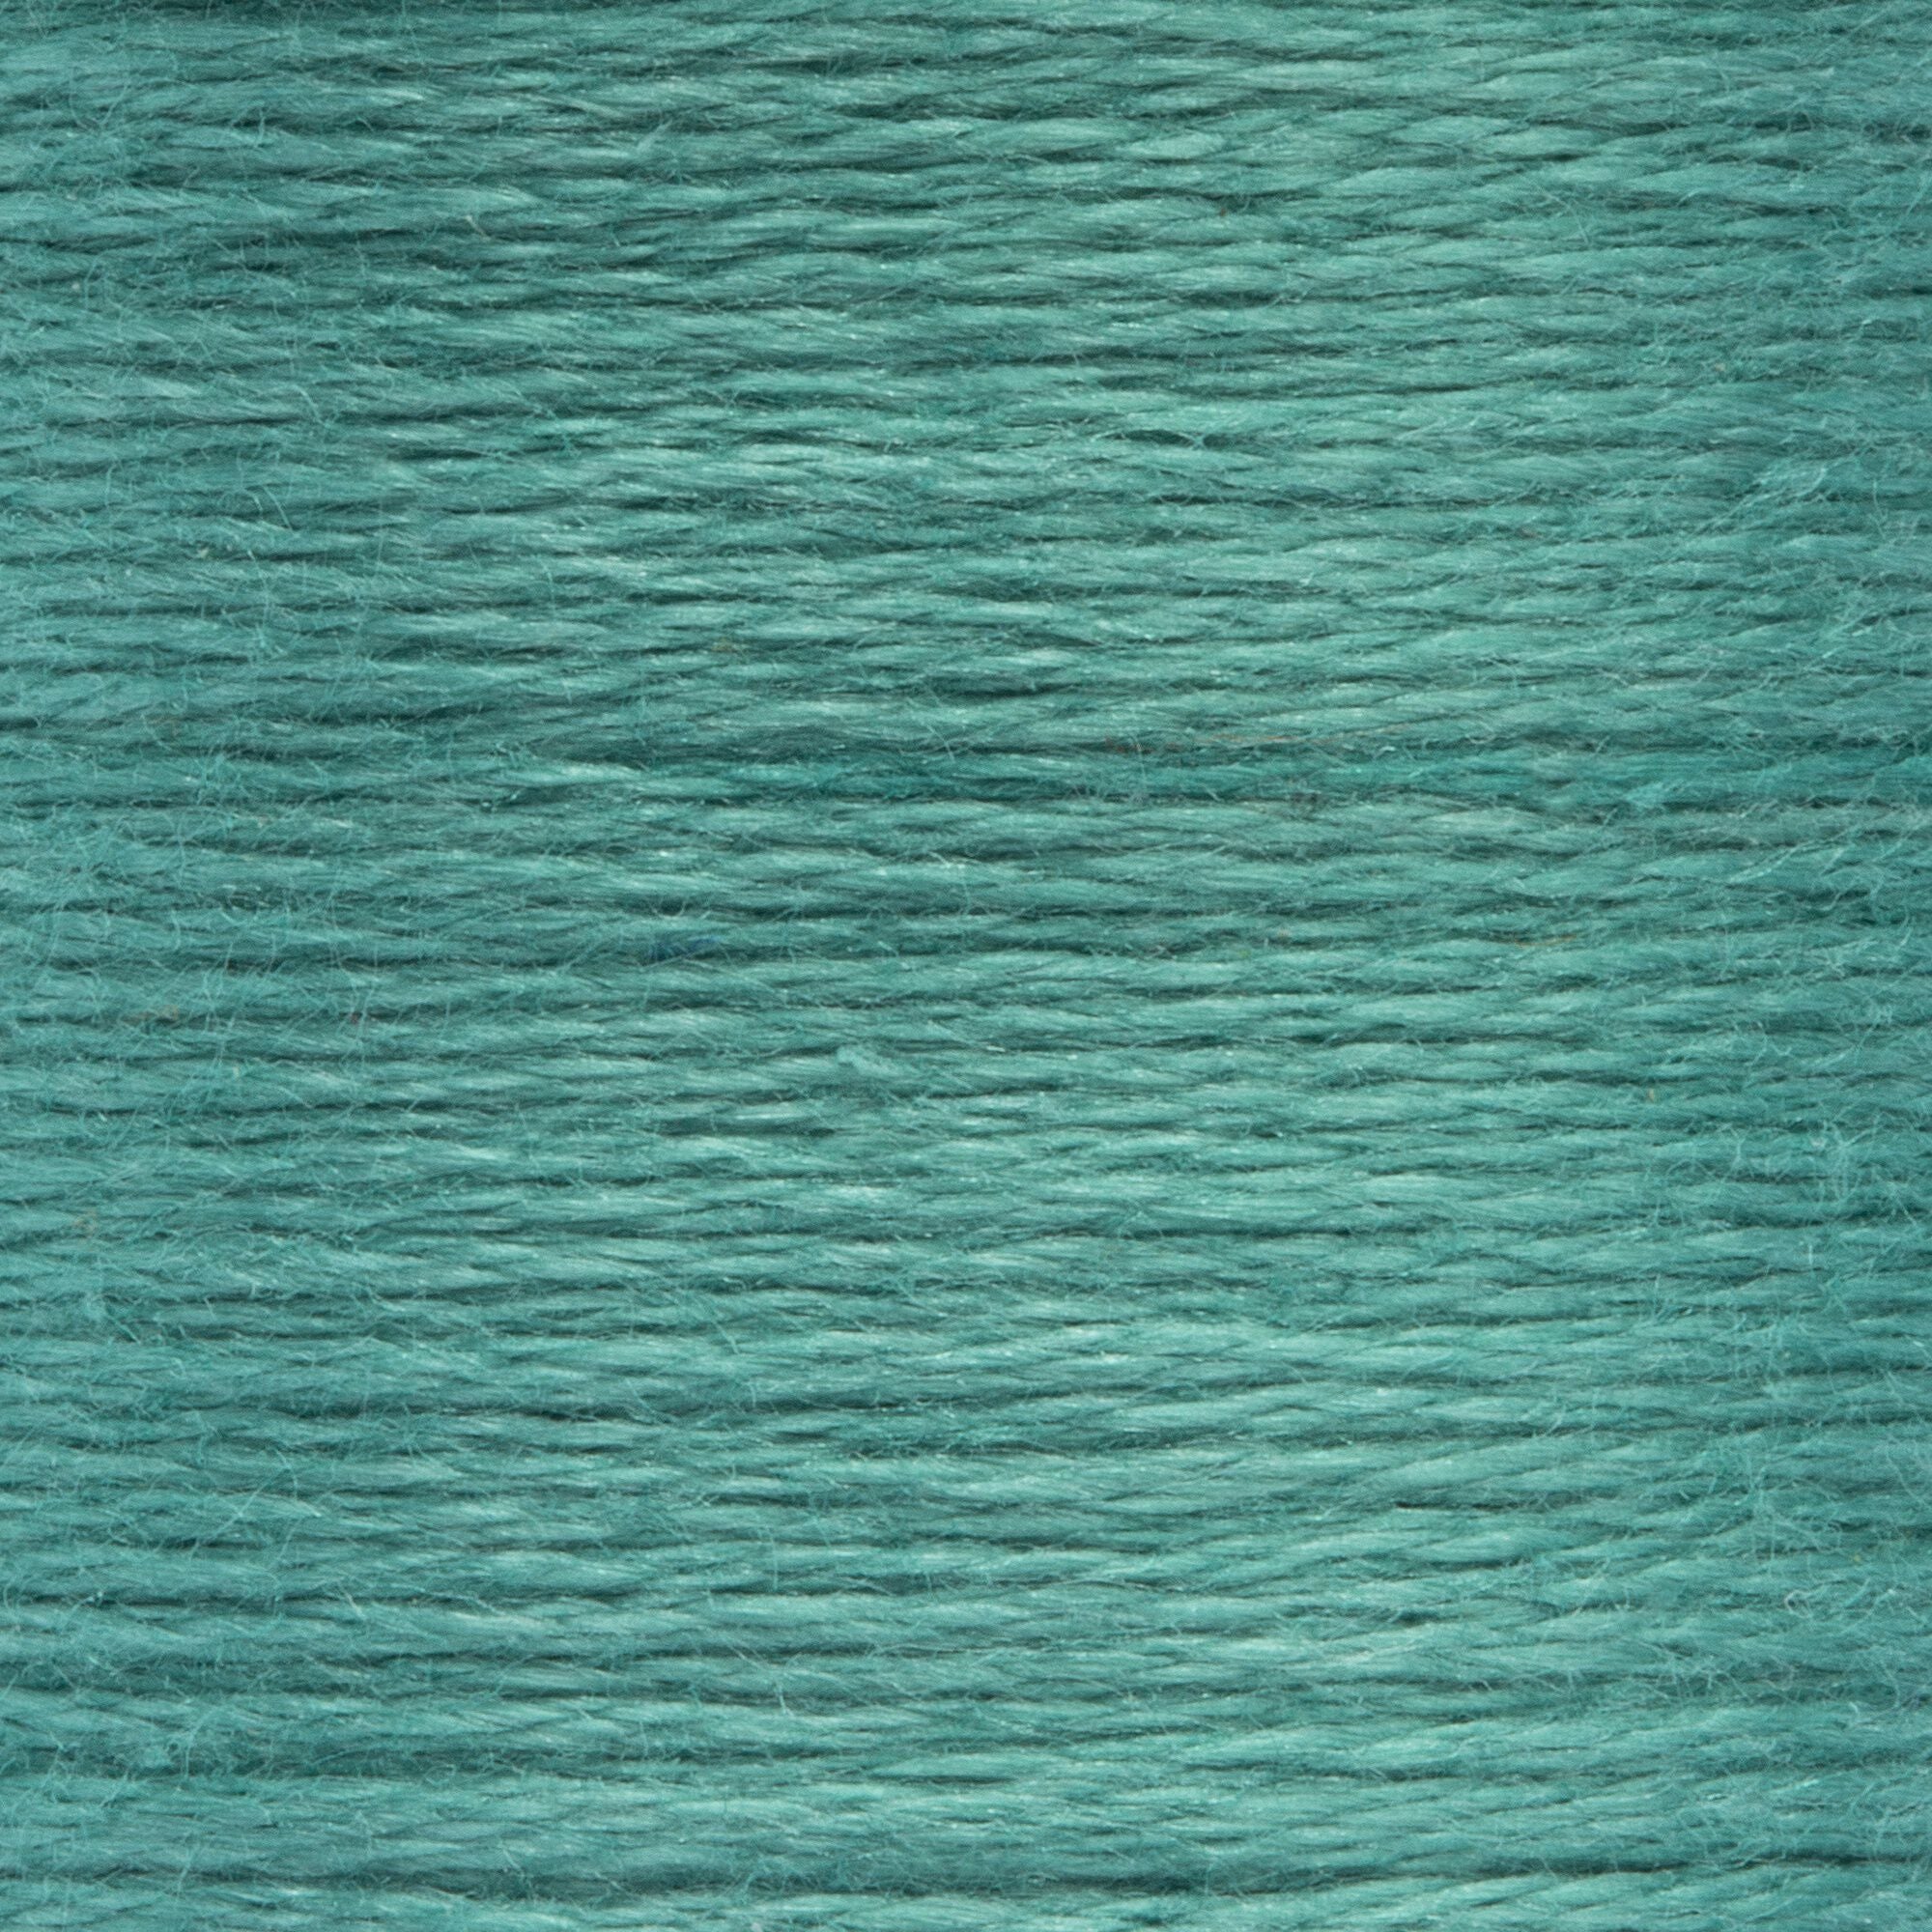 Anchor Embroidery Floss in Jade Med